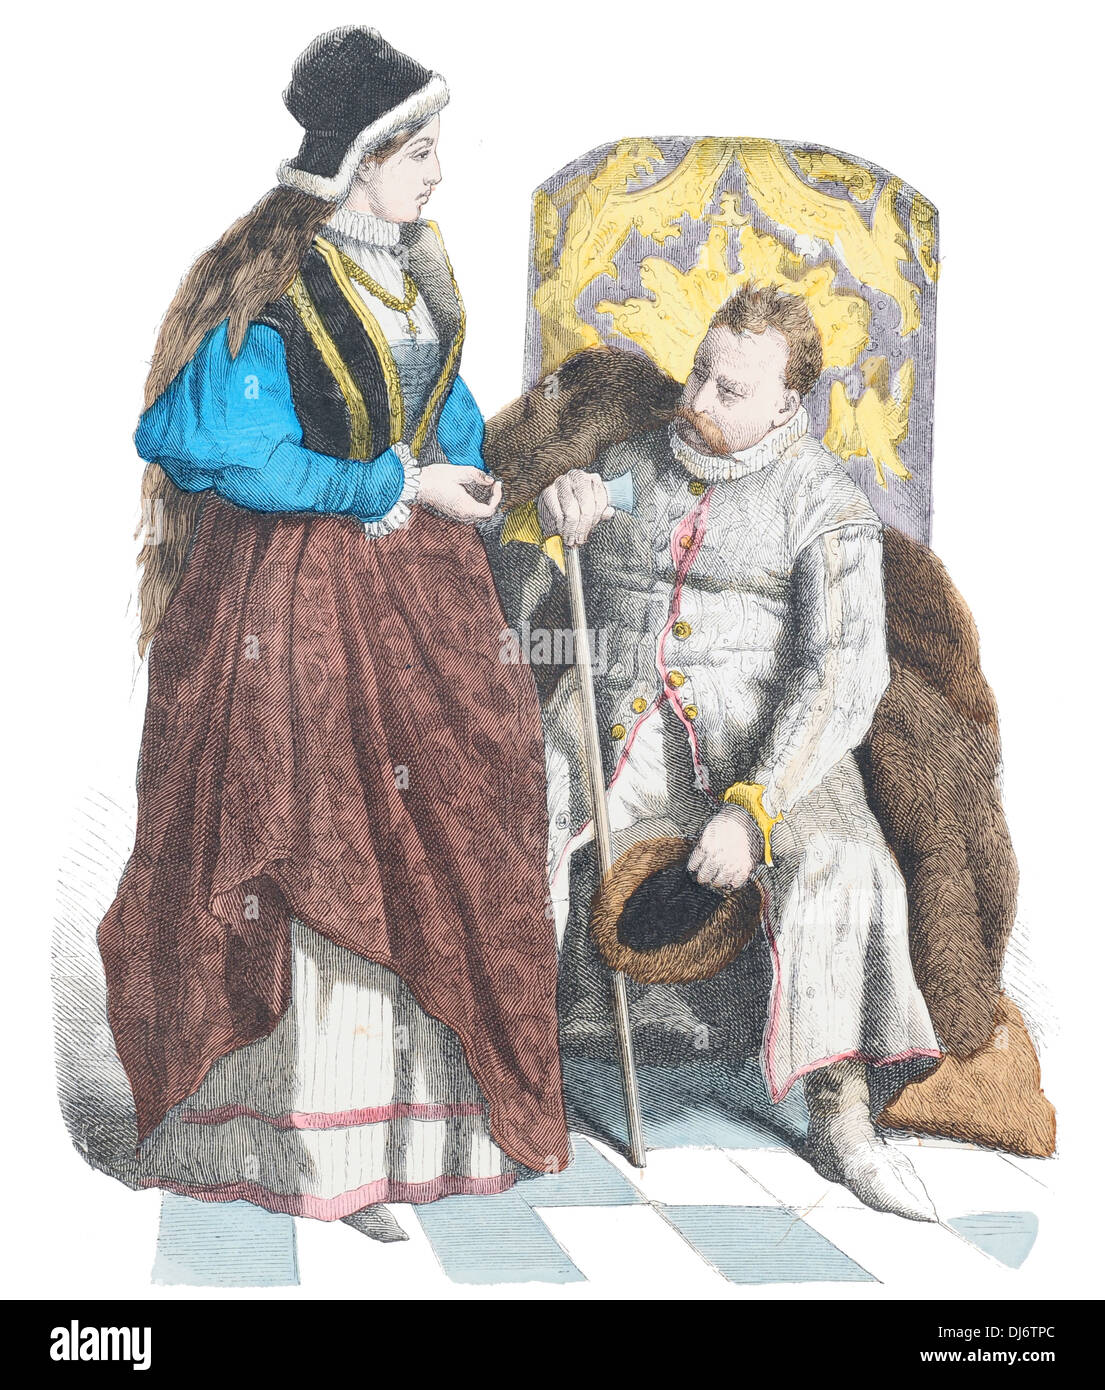 16th Century Polish lady and noble man in national dress Stock Photo